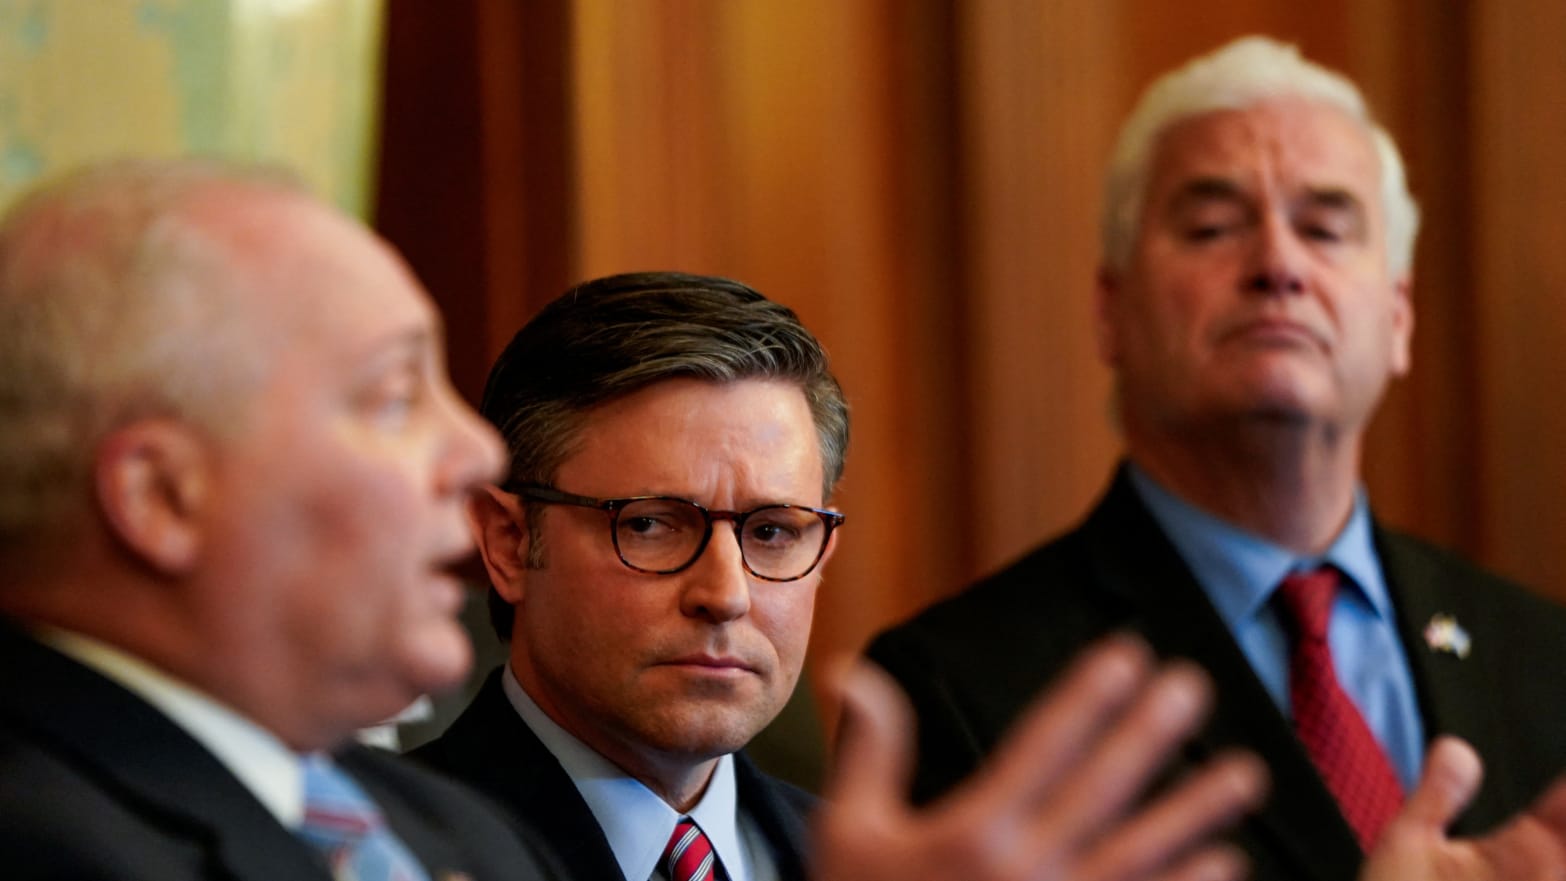 Speaker Mike Johnson (R-LA) and Majority Whip Tom Emmer (R-MN) listen as House Majority Whip Steve Scalise (R-LA) speaks during a press conference about an impeachment inquiry into President Joe Biden.